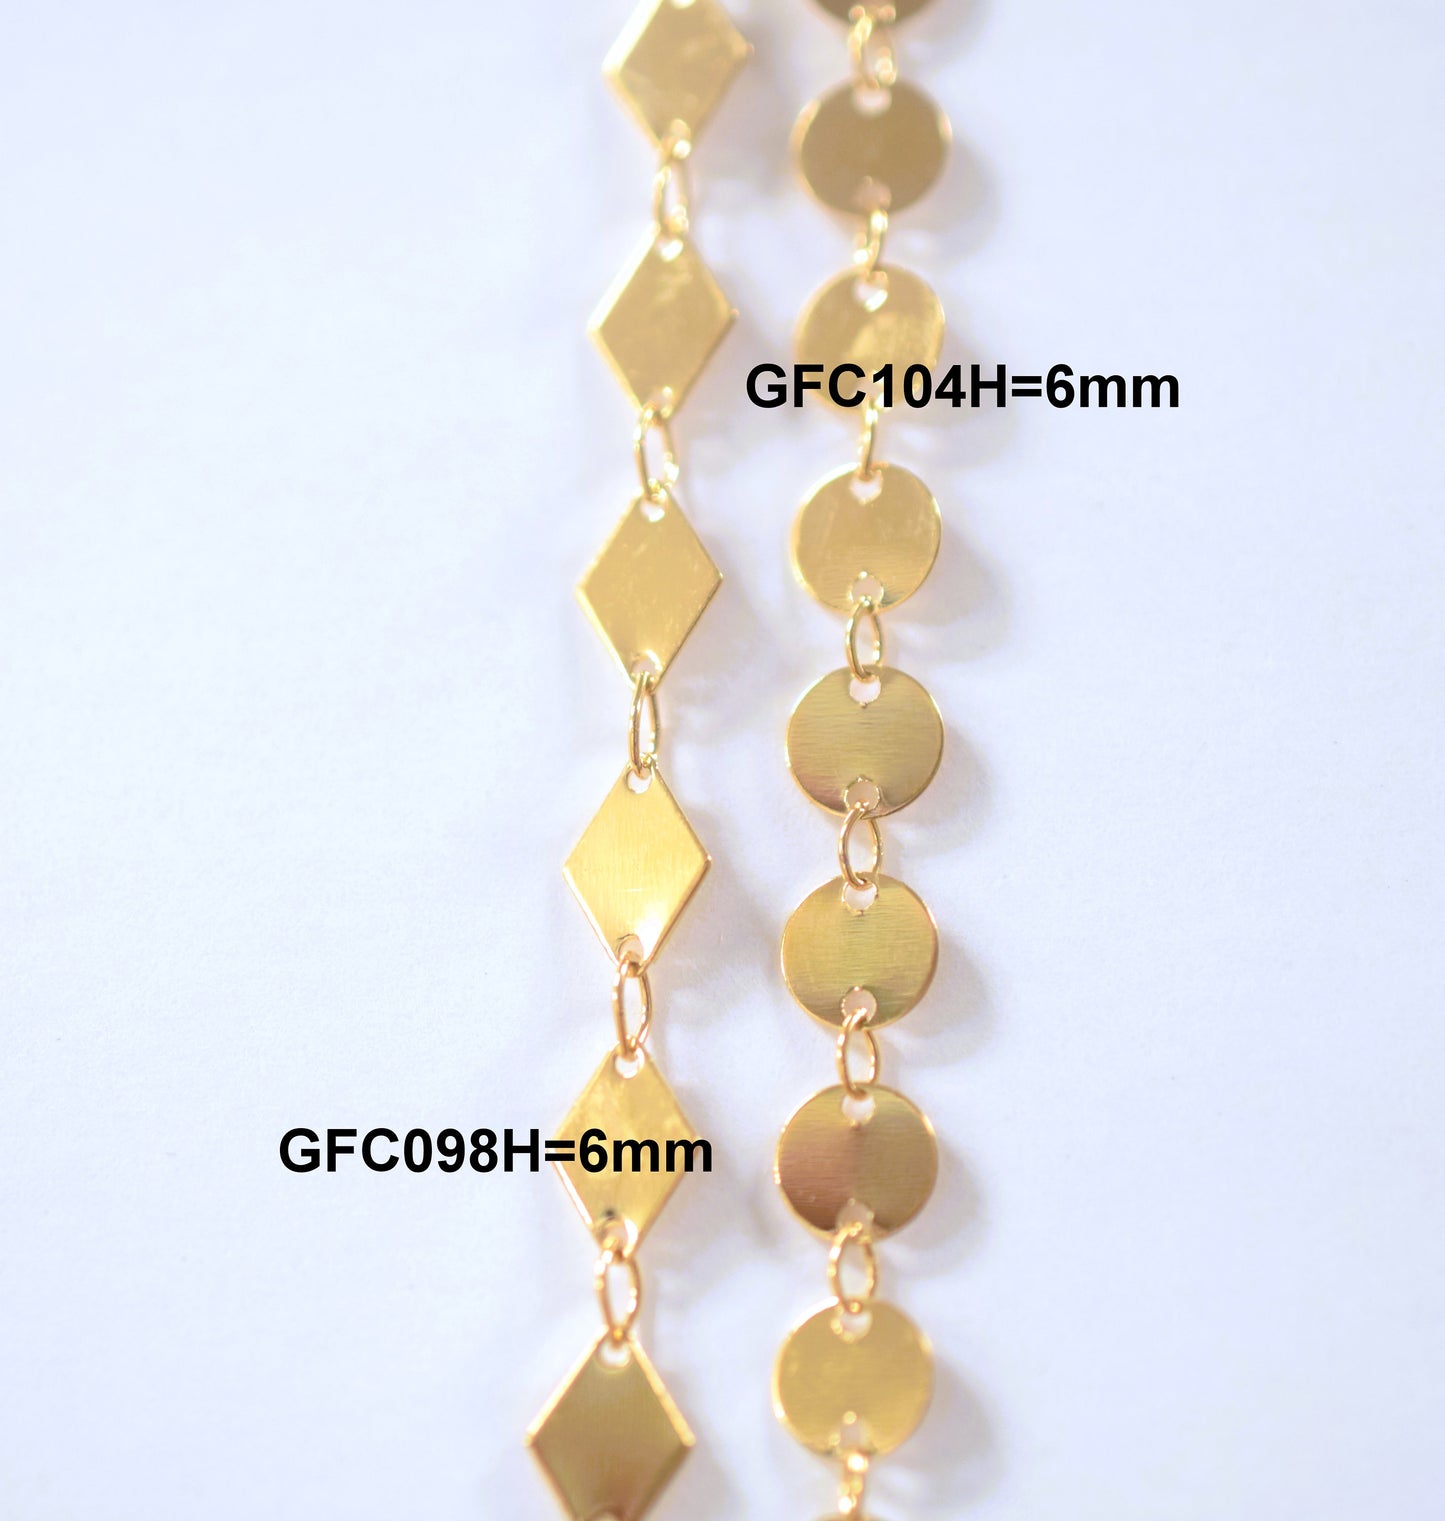 3 Feet 18K Gold Filled Chain Diamond/Round link Necklace customize Chain Width 6mm Gold Filled findings for Jewelry supplier and wholesale